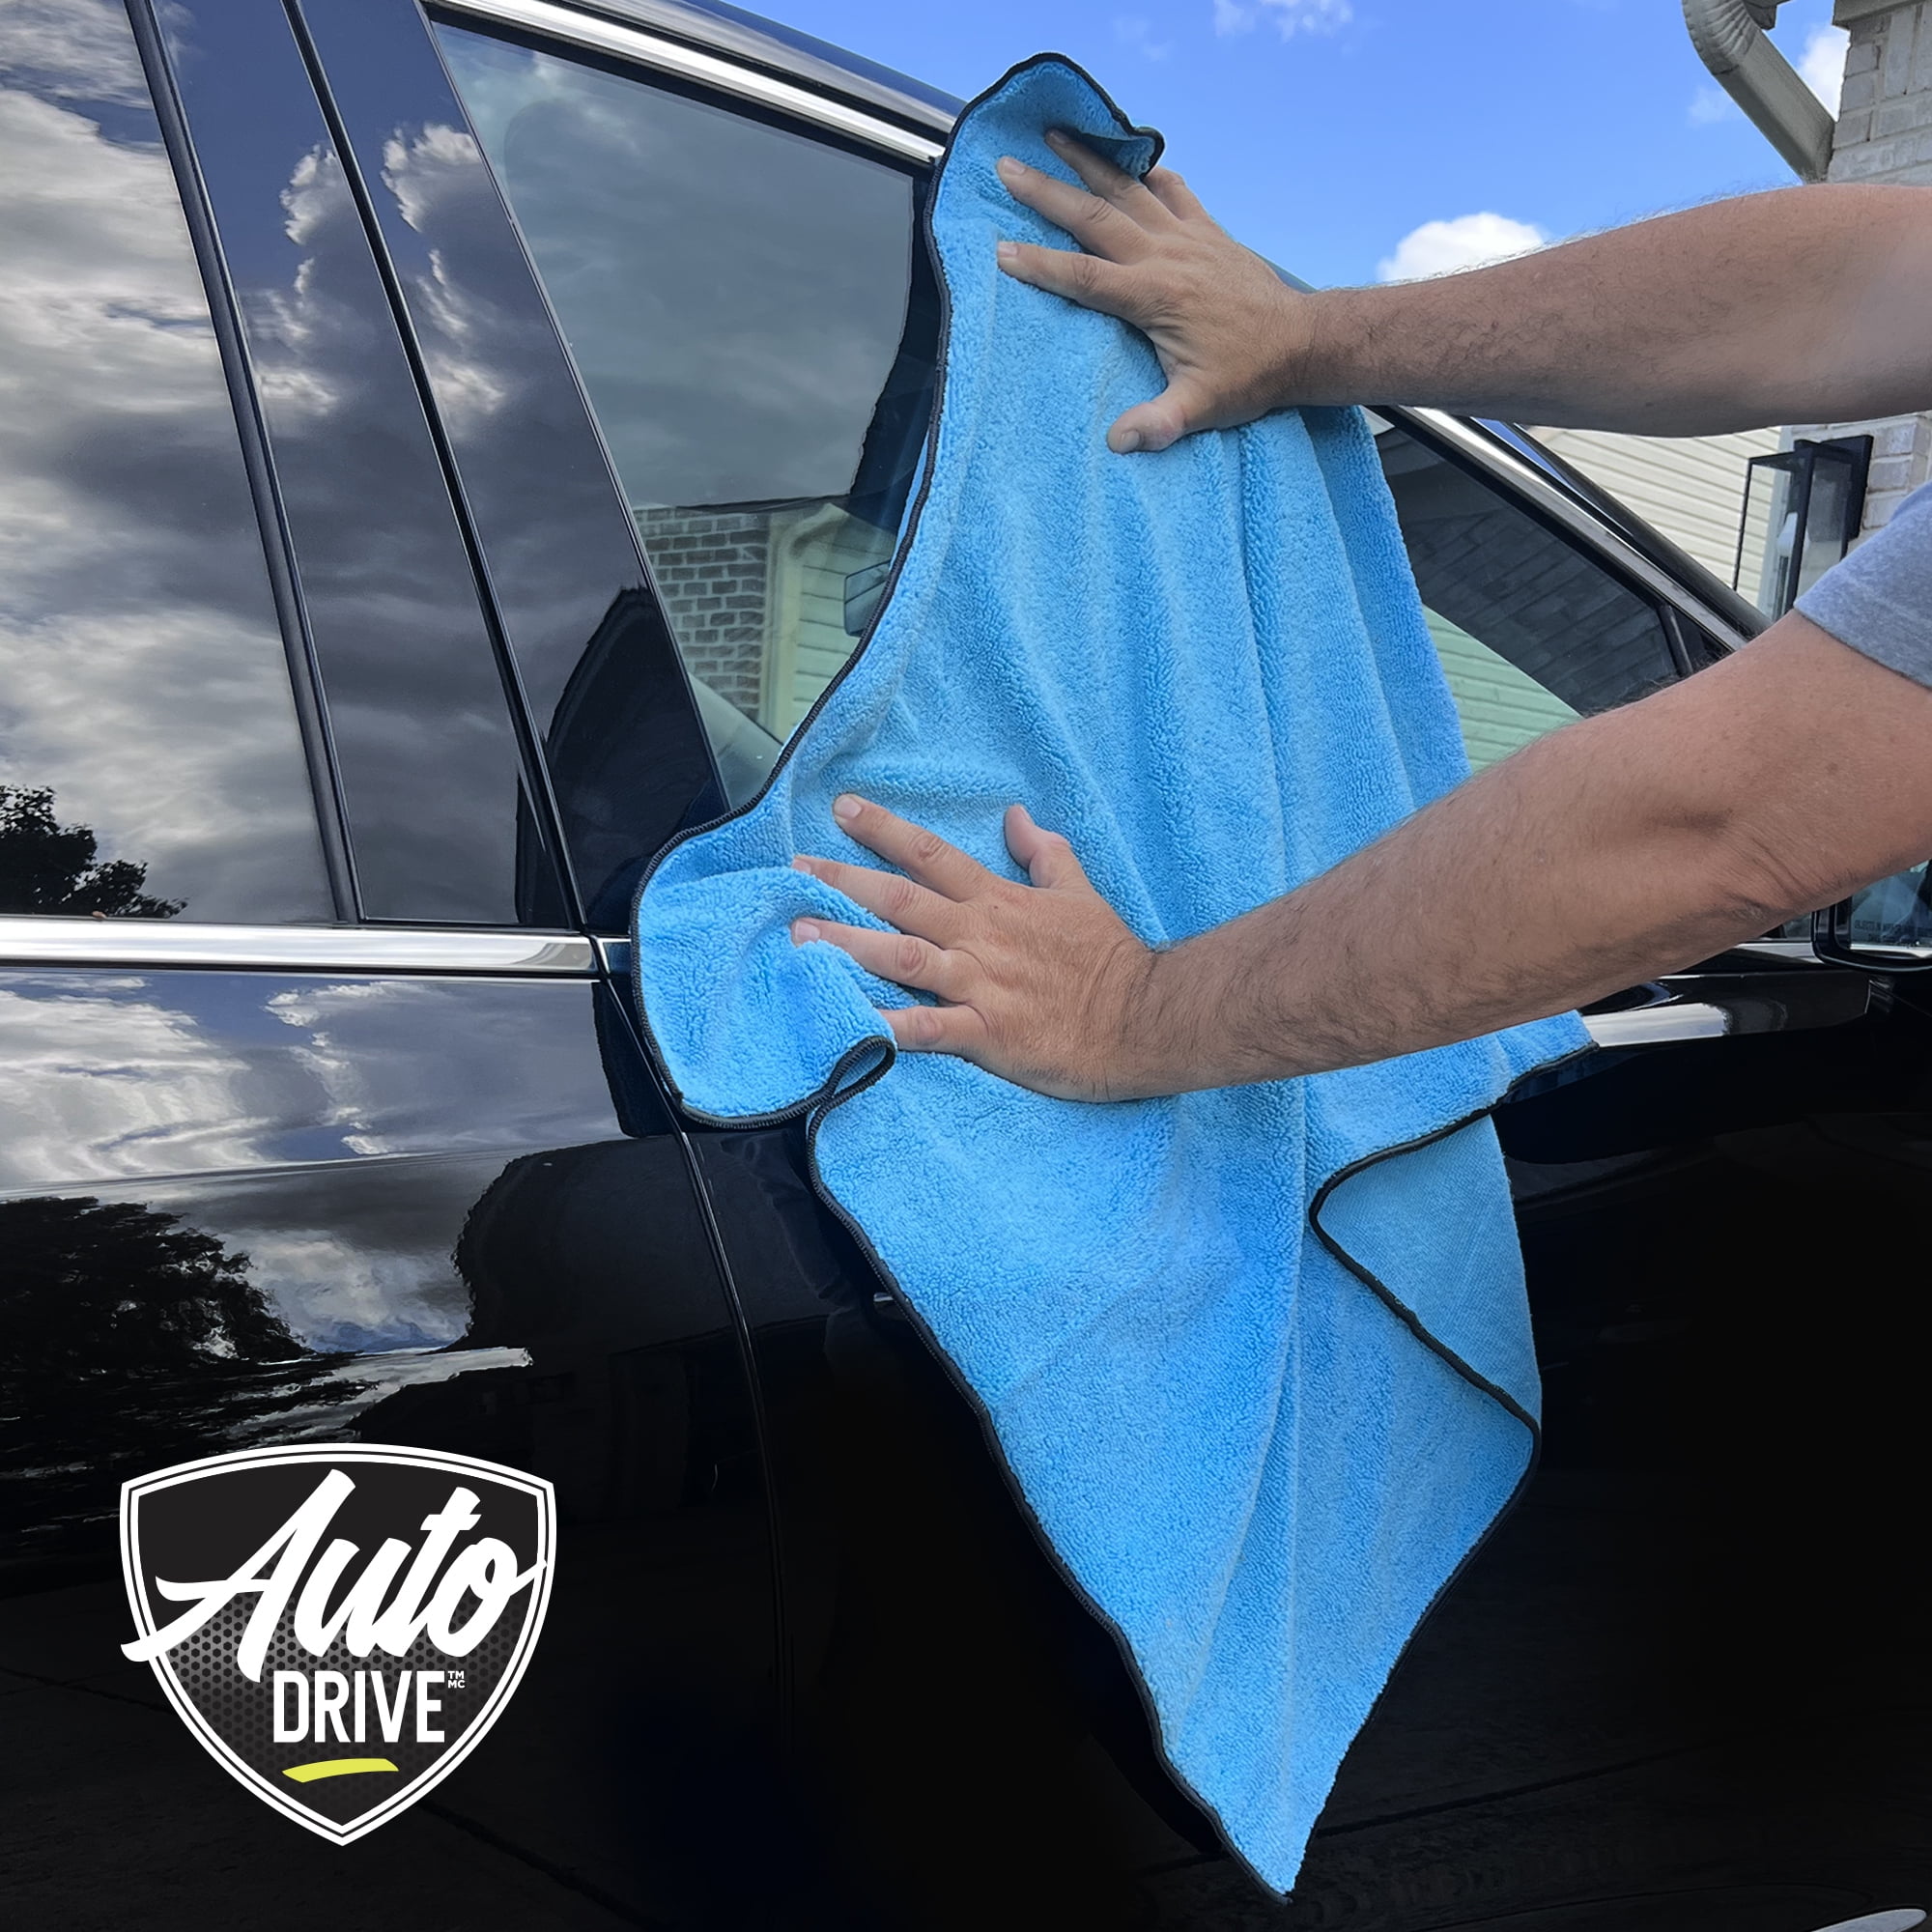  Dialed Drying Towel 1600 GSM, Dialed Drying Towel, Microfiber  Car Wash Drying Towel, Dialed Car Care Drying Towel, Microfiber Towels for  Cars, Car Towels Drying (35 * 75cm, Blue) : Automotive